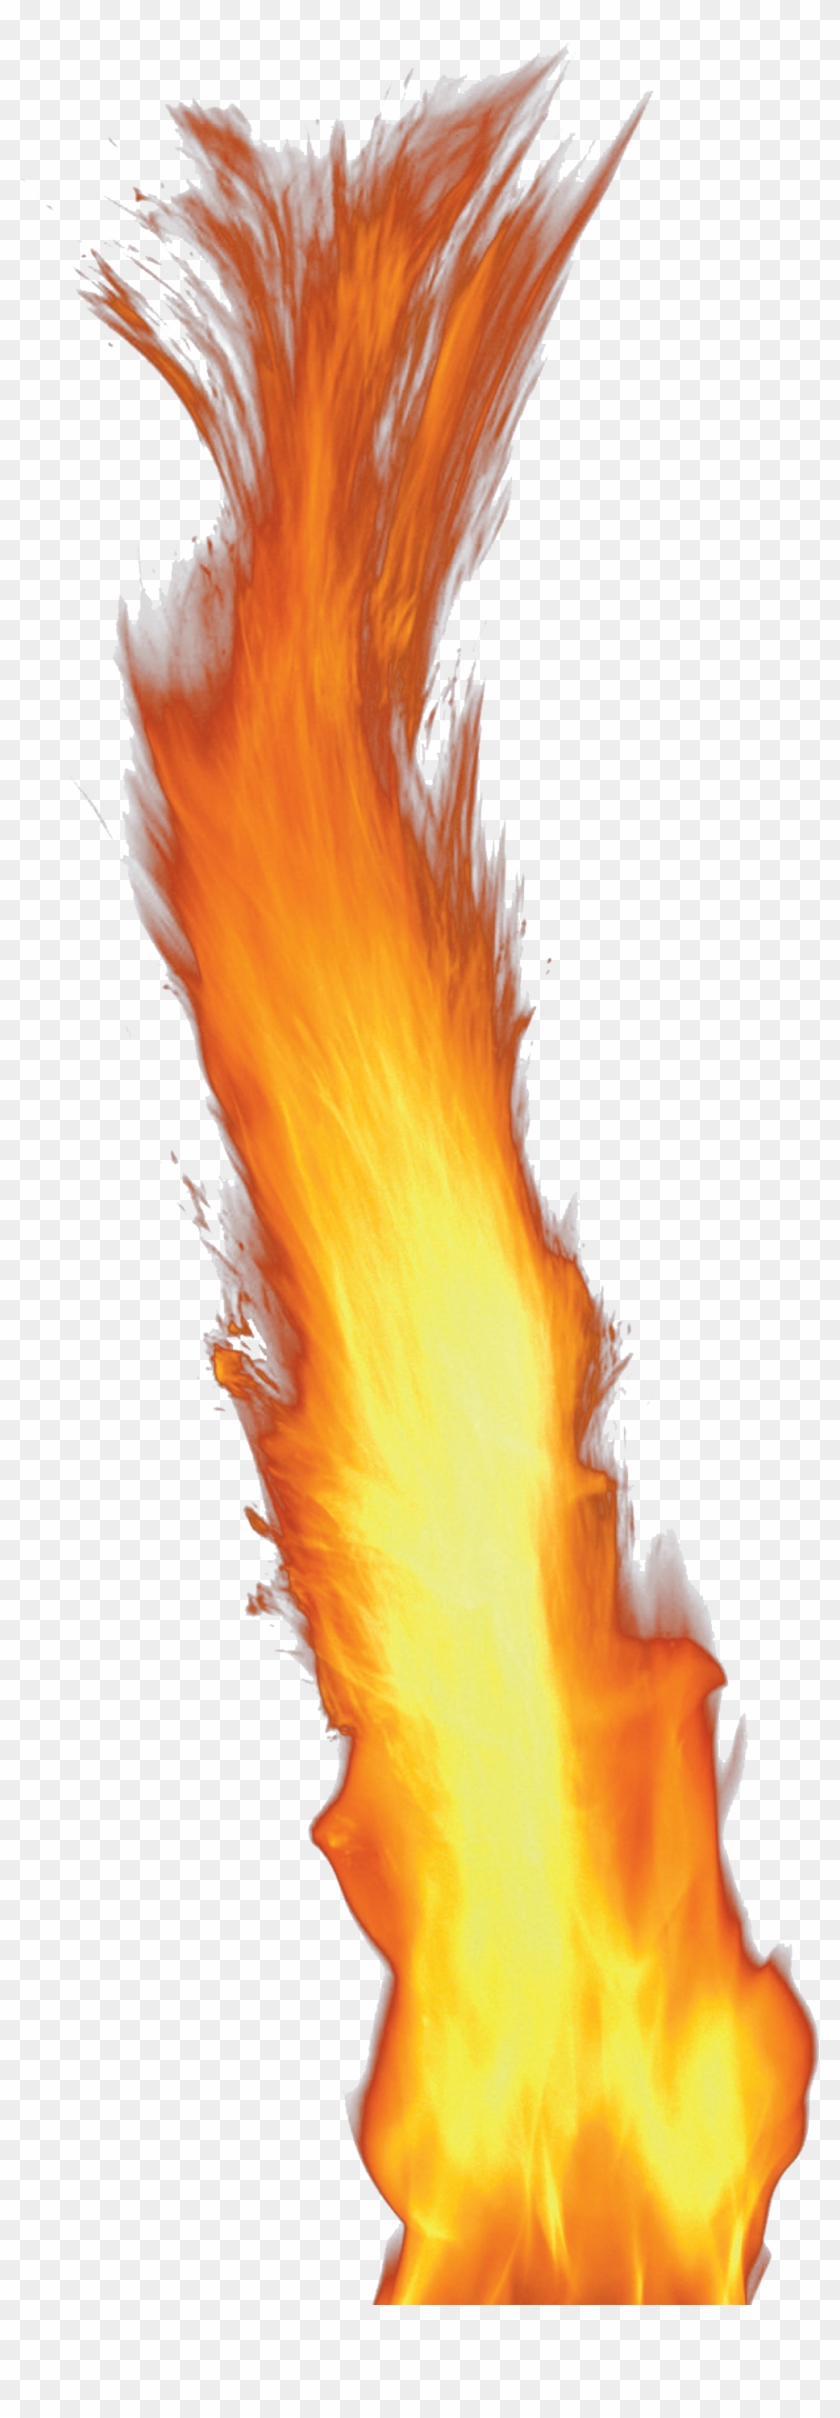 Fire Gif Png - Transparent Background Fire Png, Png Download -  1560x2917(#35588) - PngFind